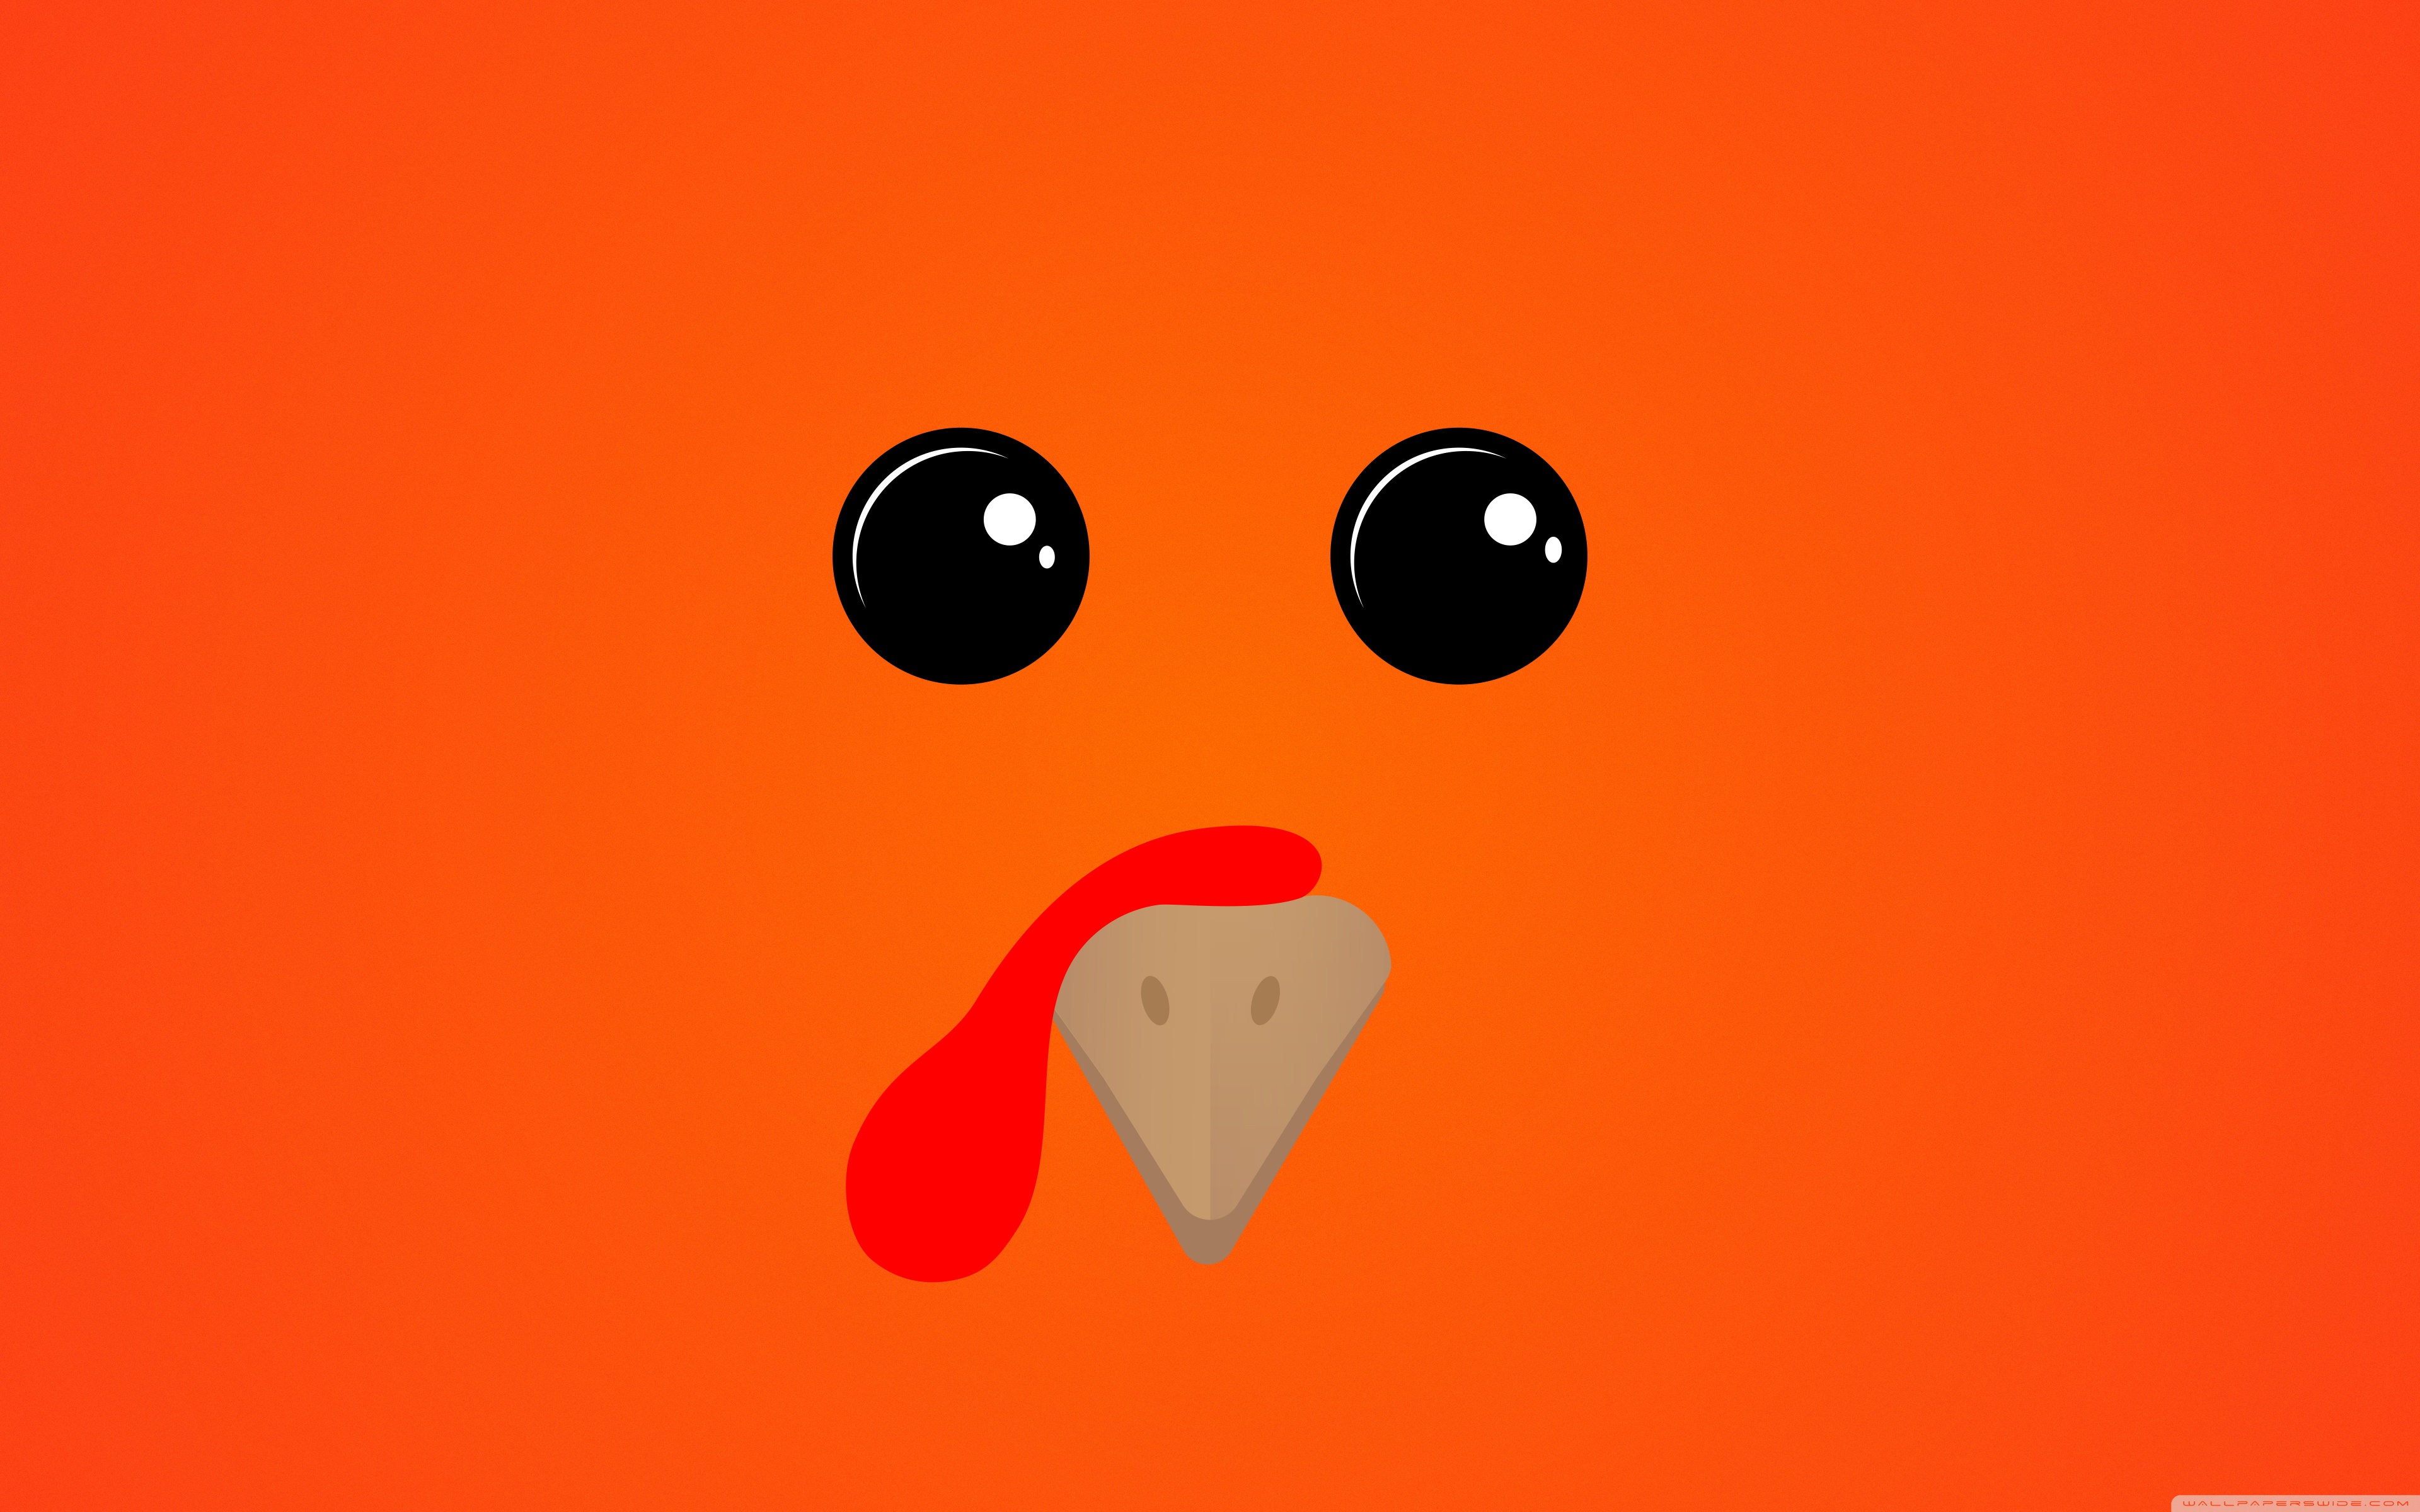 A close up of an orange chicken with black eyes - Funny